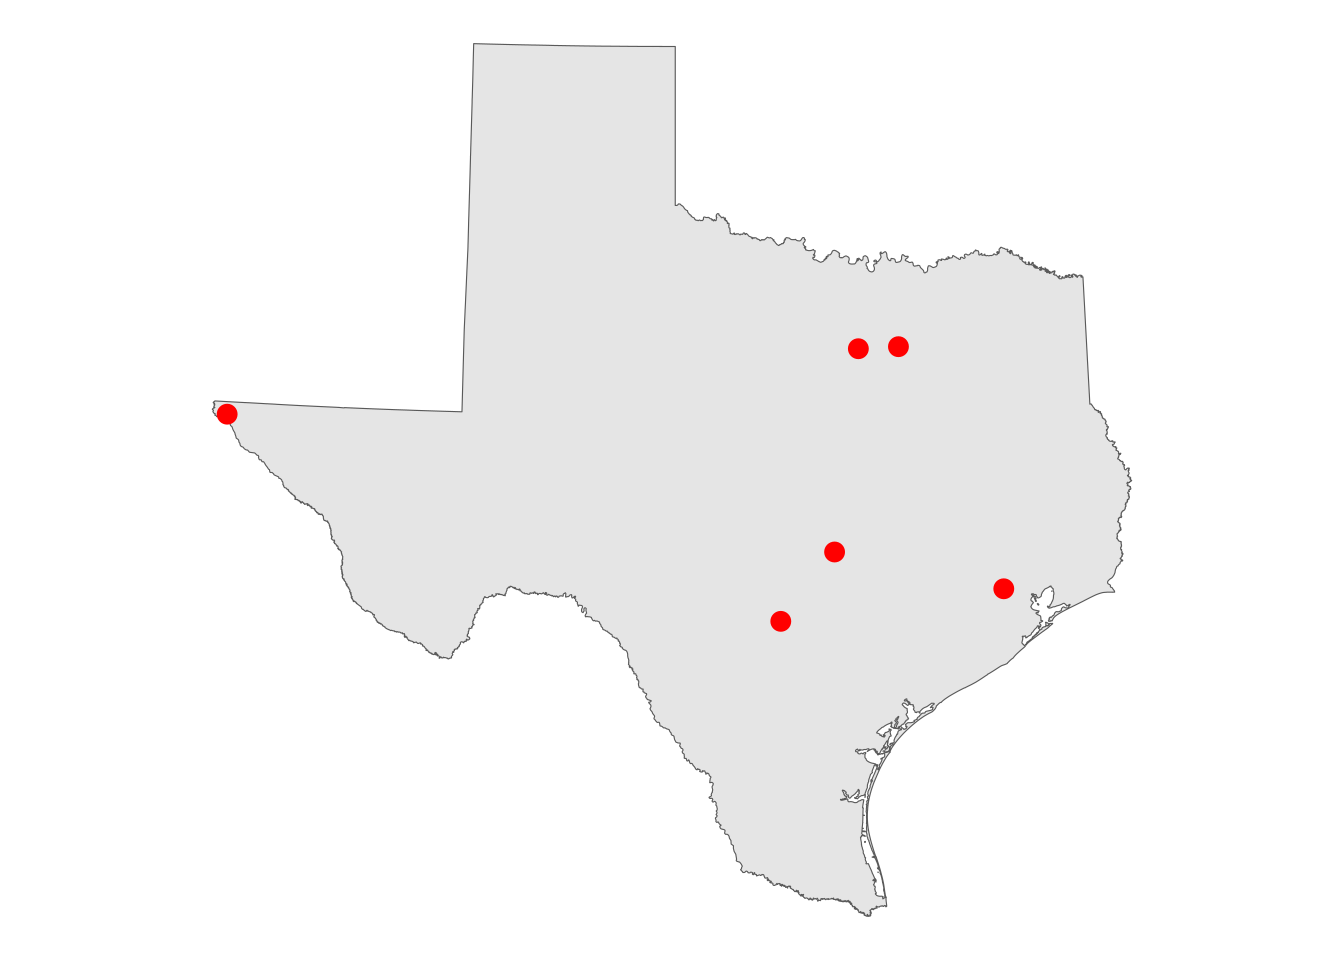 Large cities in Texas represented as points